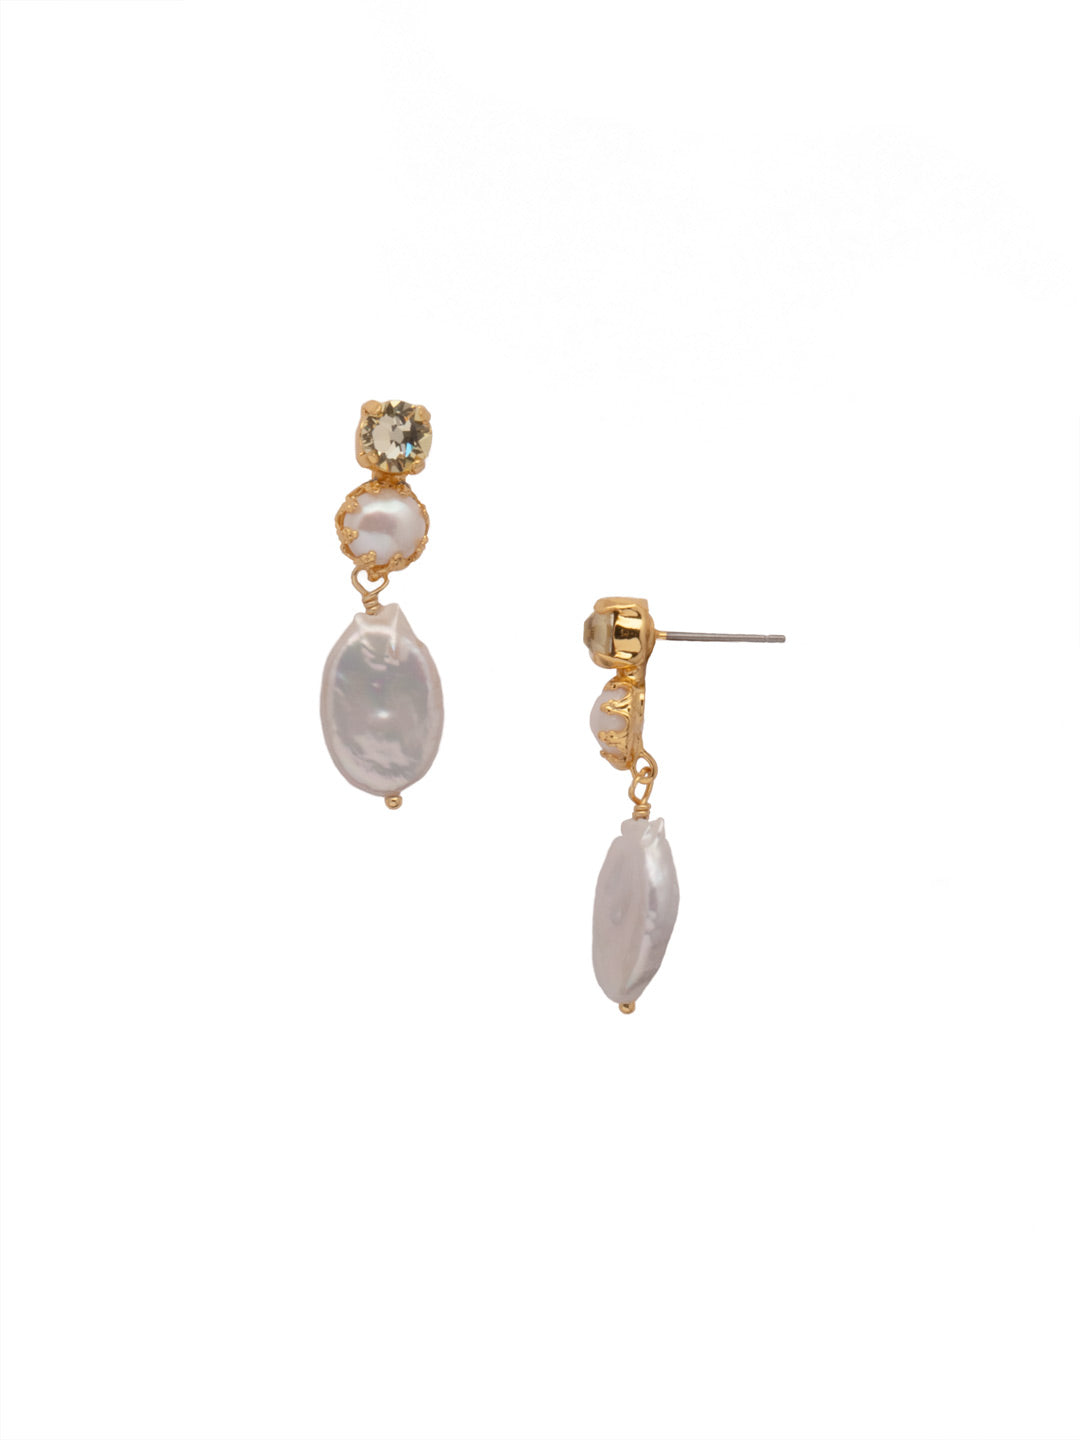 Arbor Dangle Earrings - EES120BGSPR - Put on the Arbor Stud Dangle Earrings and ooze class with freshwater pearl accented with an opaque crystal stone. They're understated and elegant, all at the same time. From Sorrelli's Spring Rain collection in our Bright Gold-tone finish.